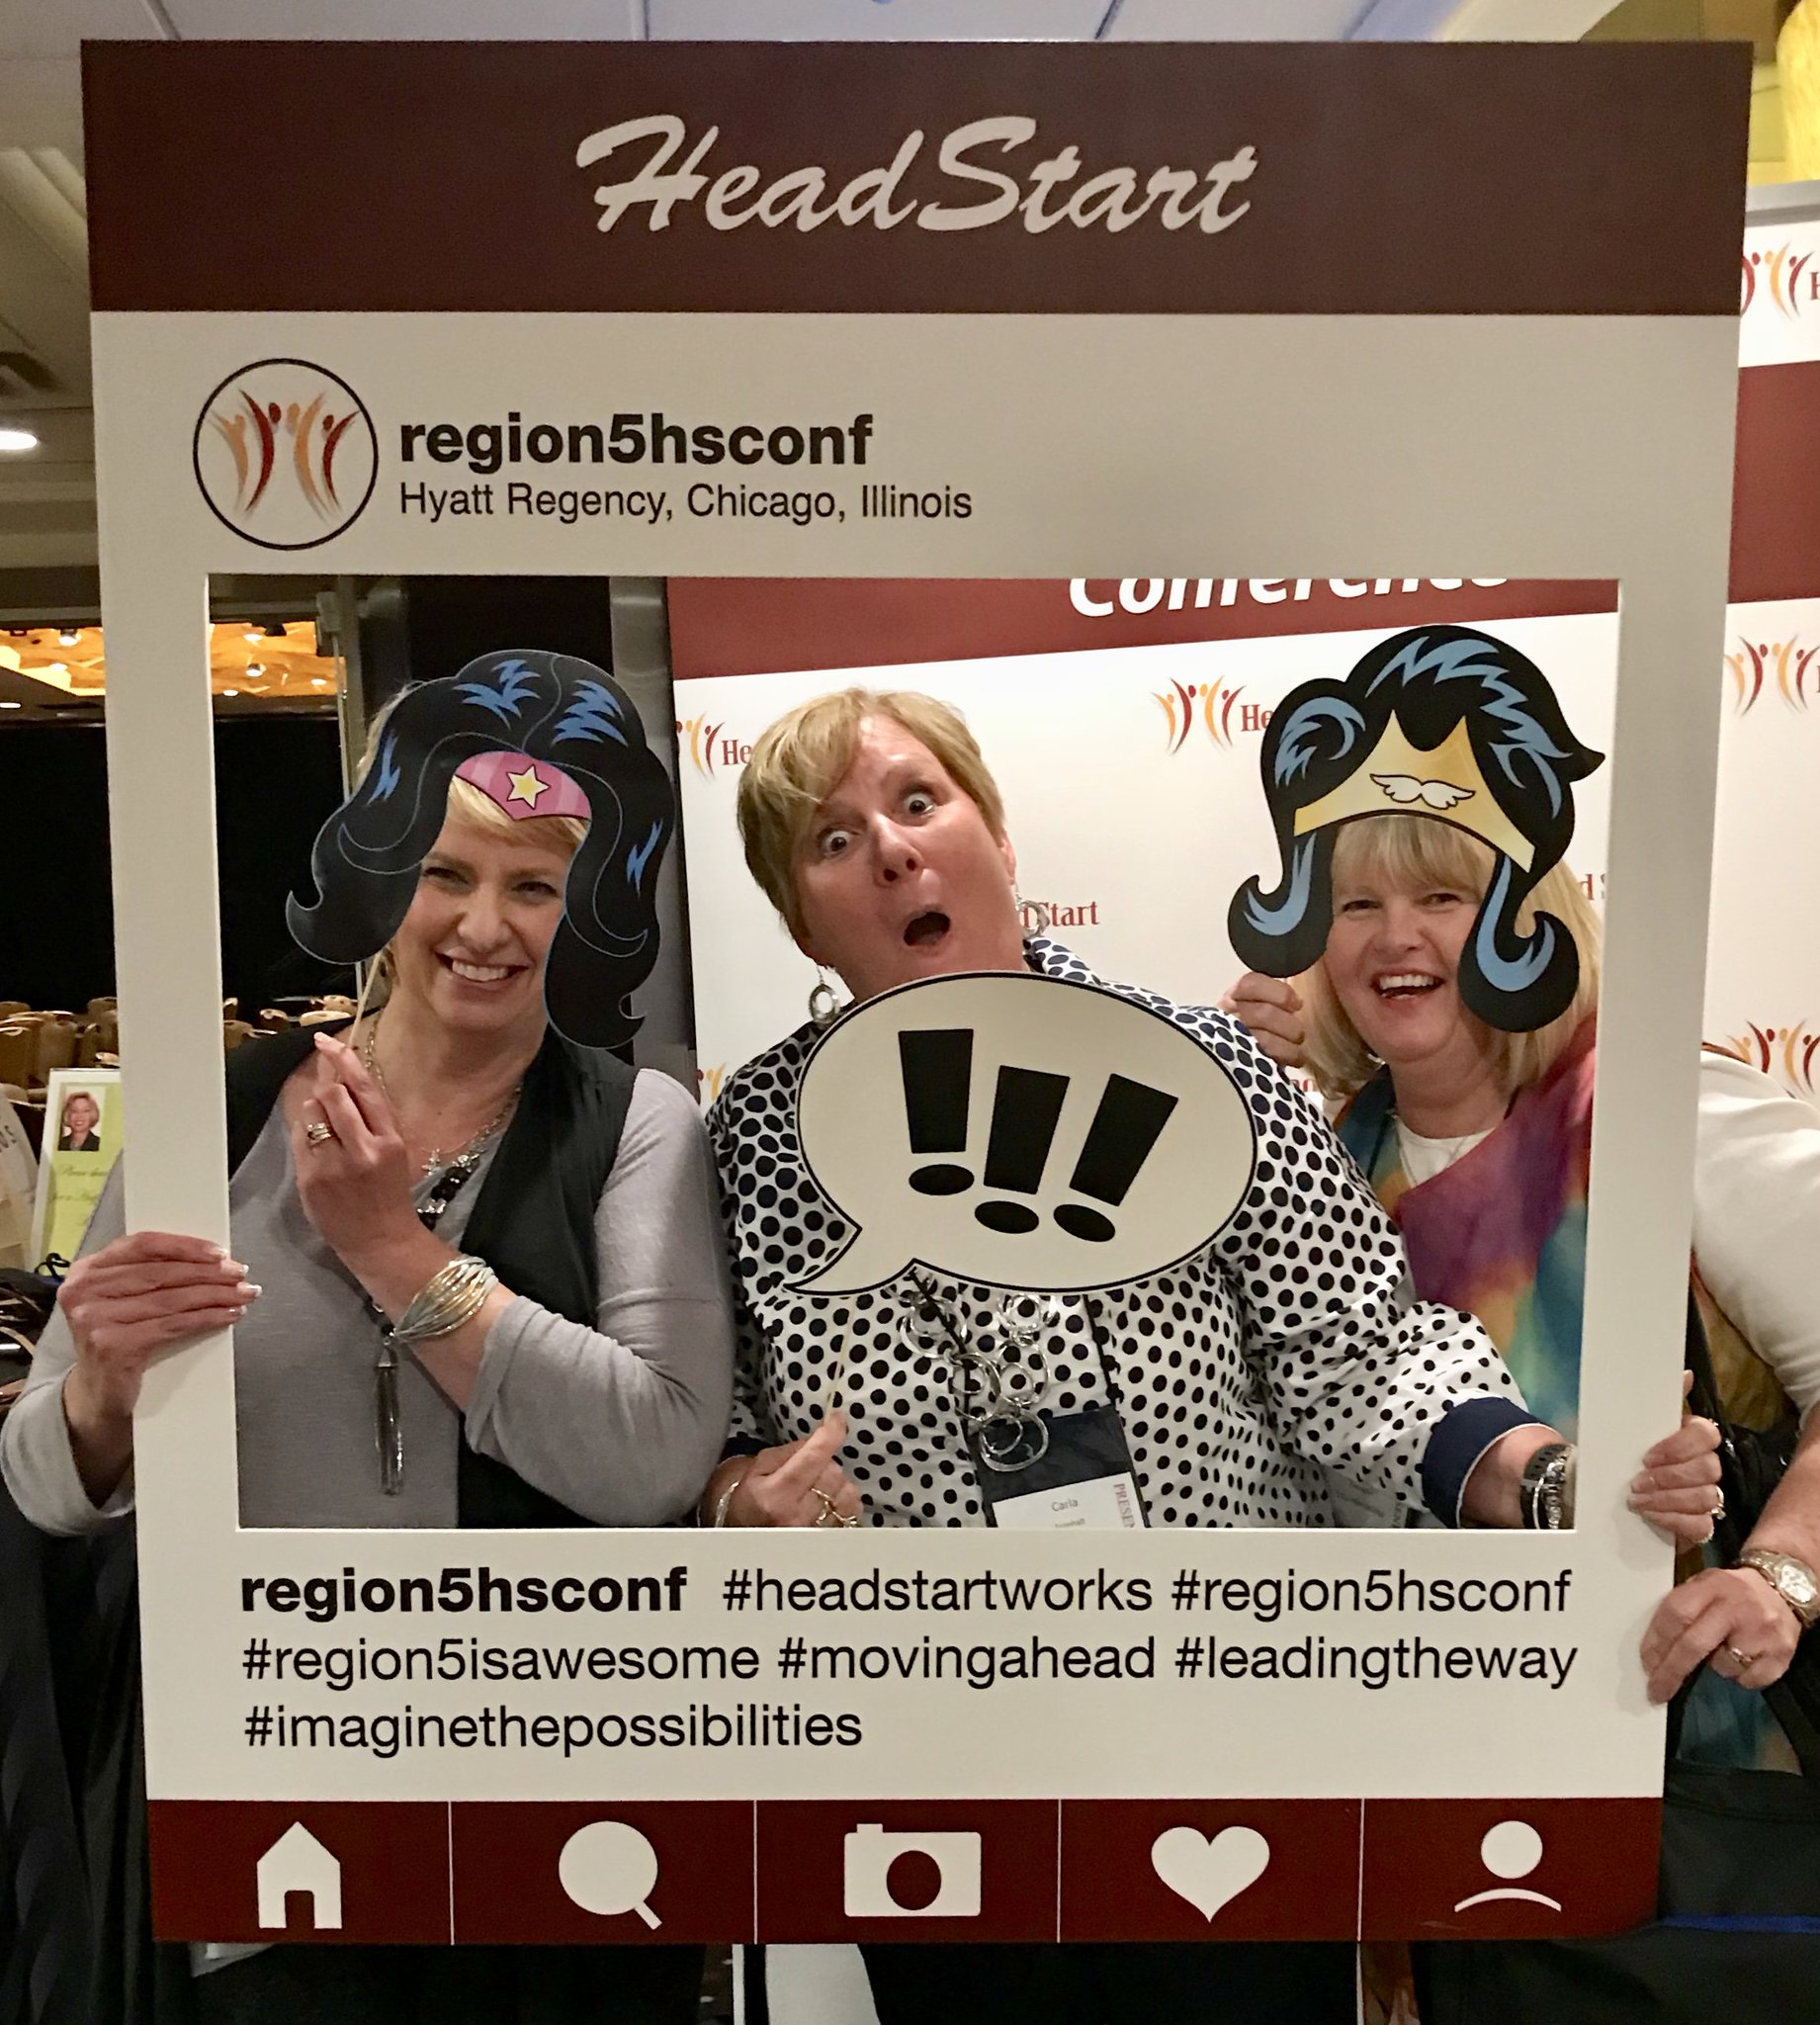 Region V Conference on Twitter "End of the day fun with STG